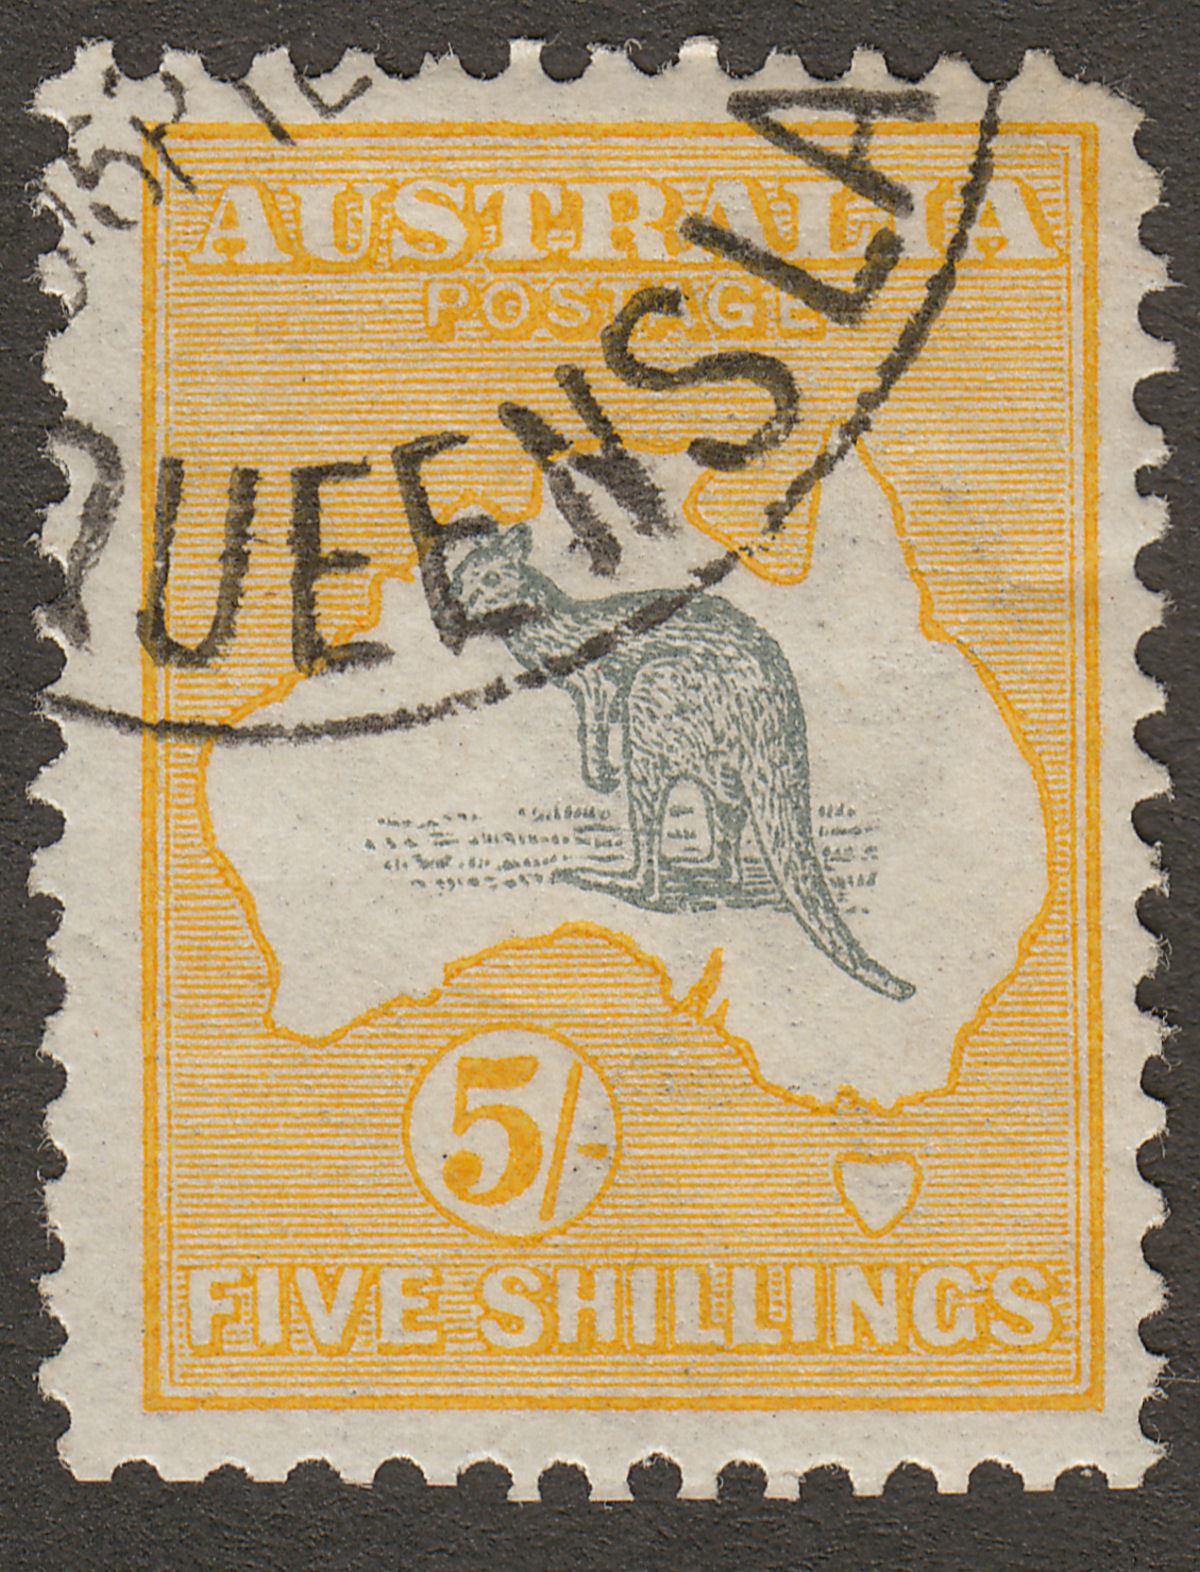 Australia 1913 KGV Roo 5sh Grey and Yellow wmk Wide Crown Used SG13 cat £200